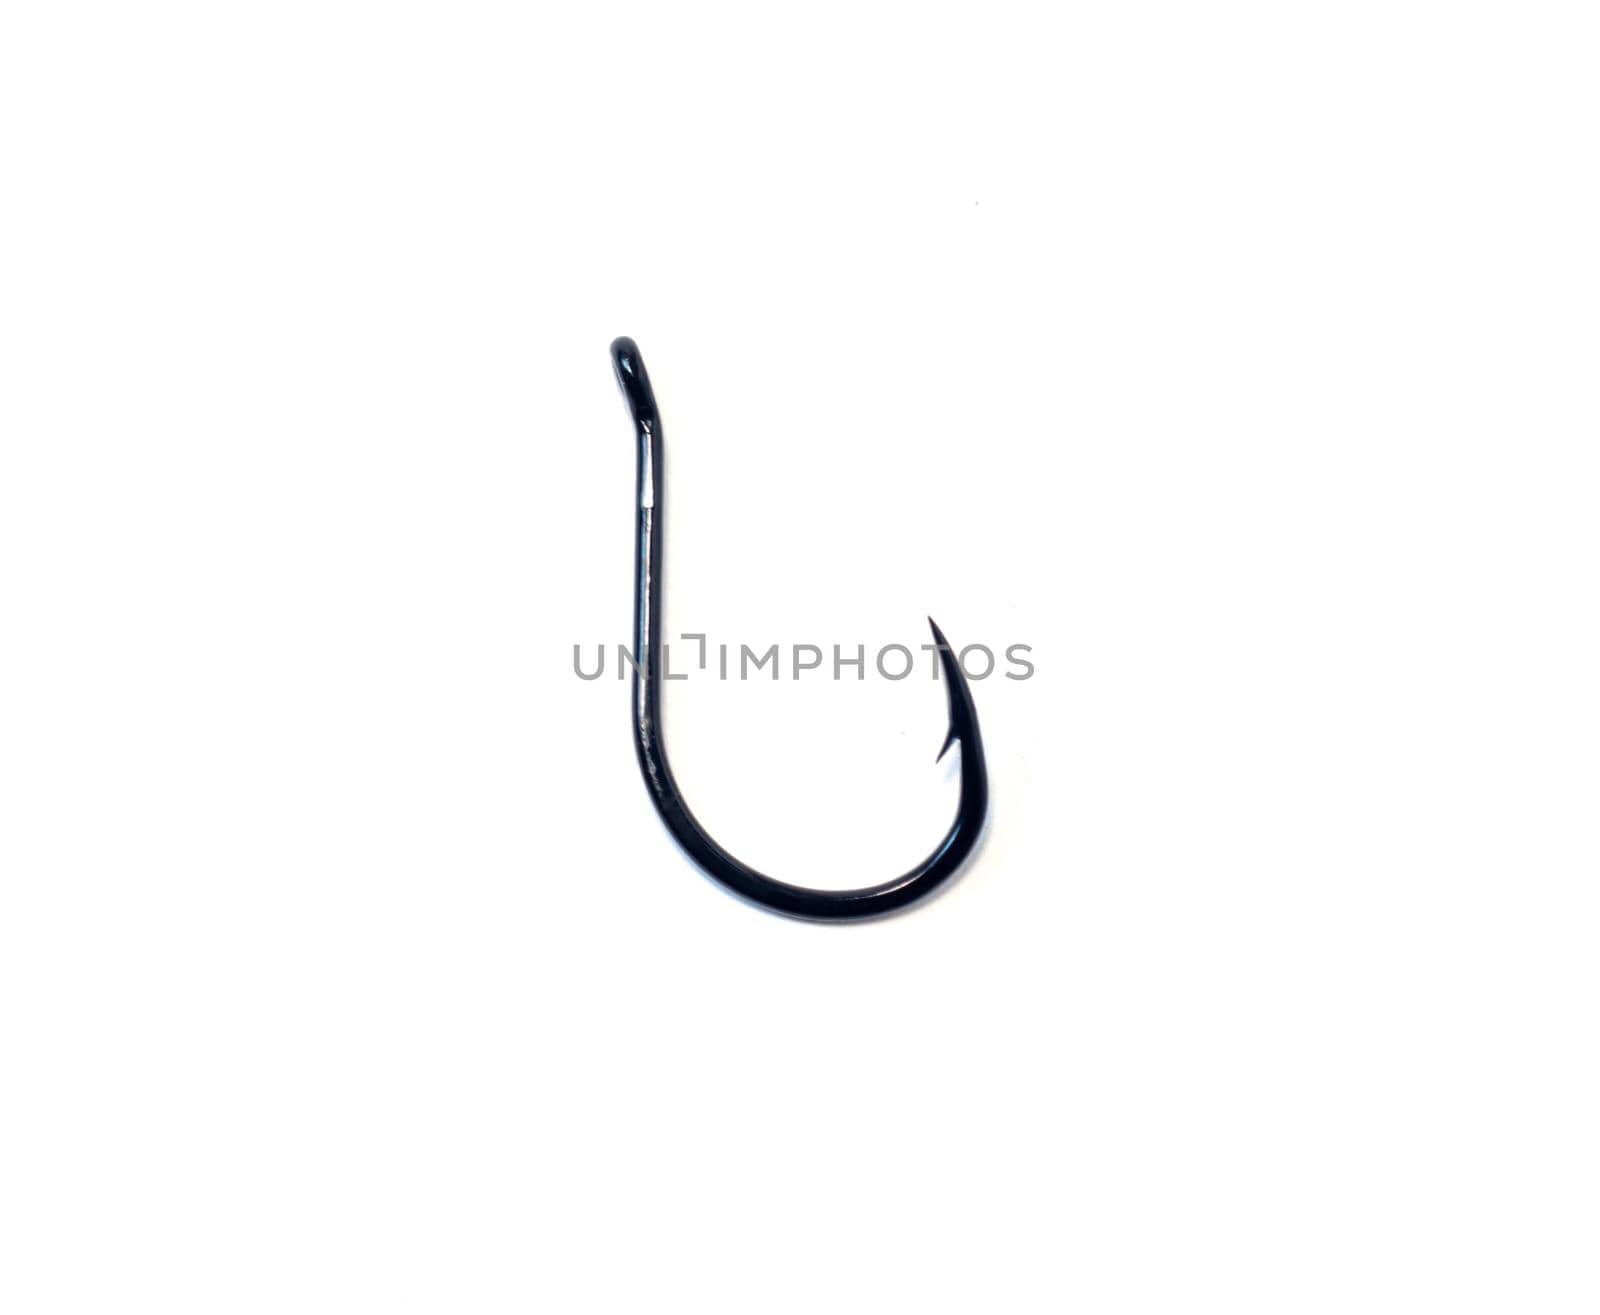 Fishing hook for catching carp on a white background